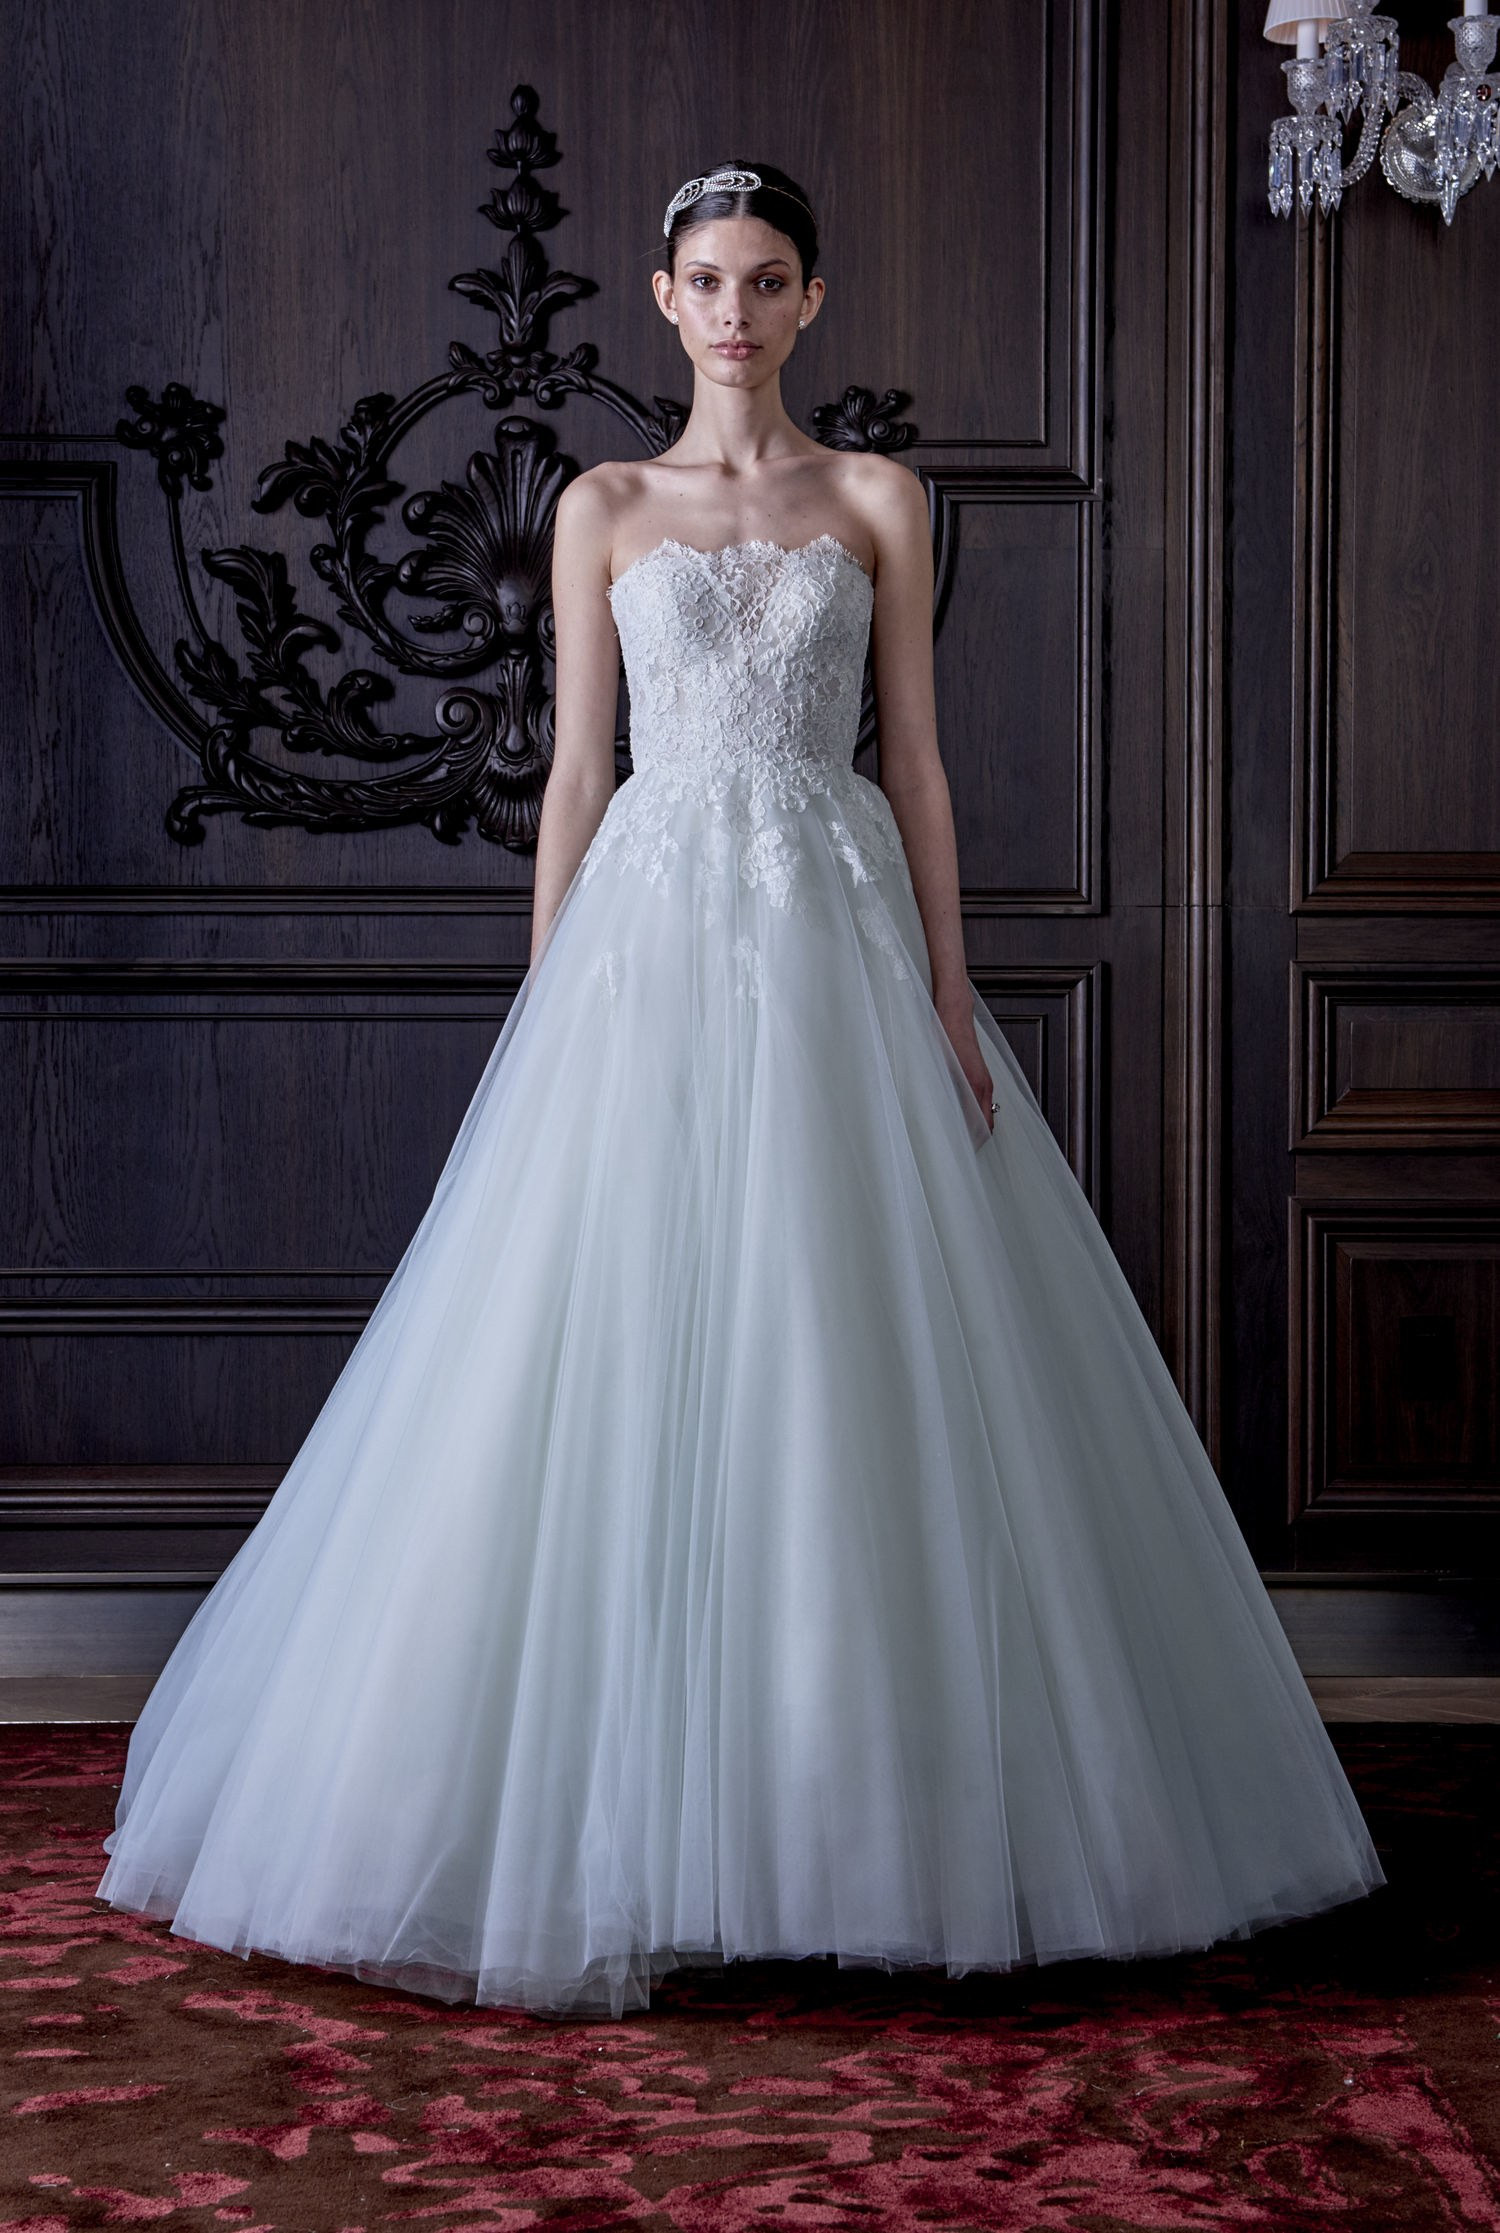 How Much Are Monique Lhuillier Wedding Gowns
 New Wedding Dresses Wedding Gowns Monique Lhuillier